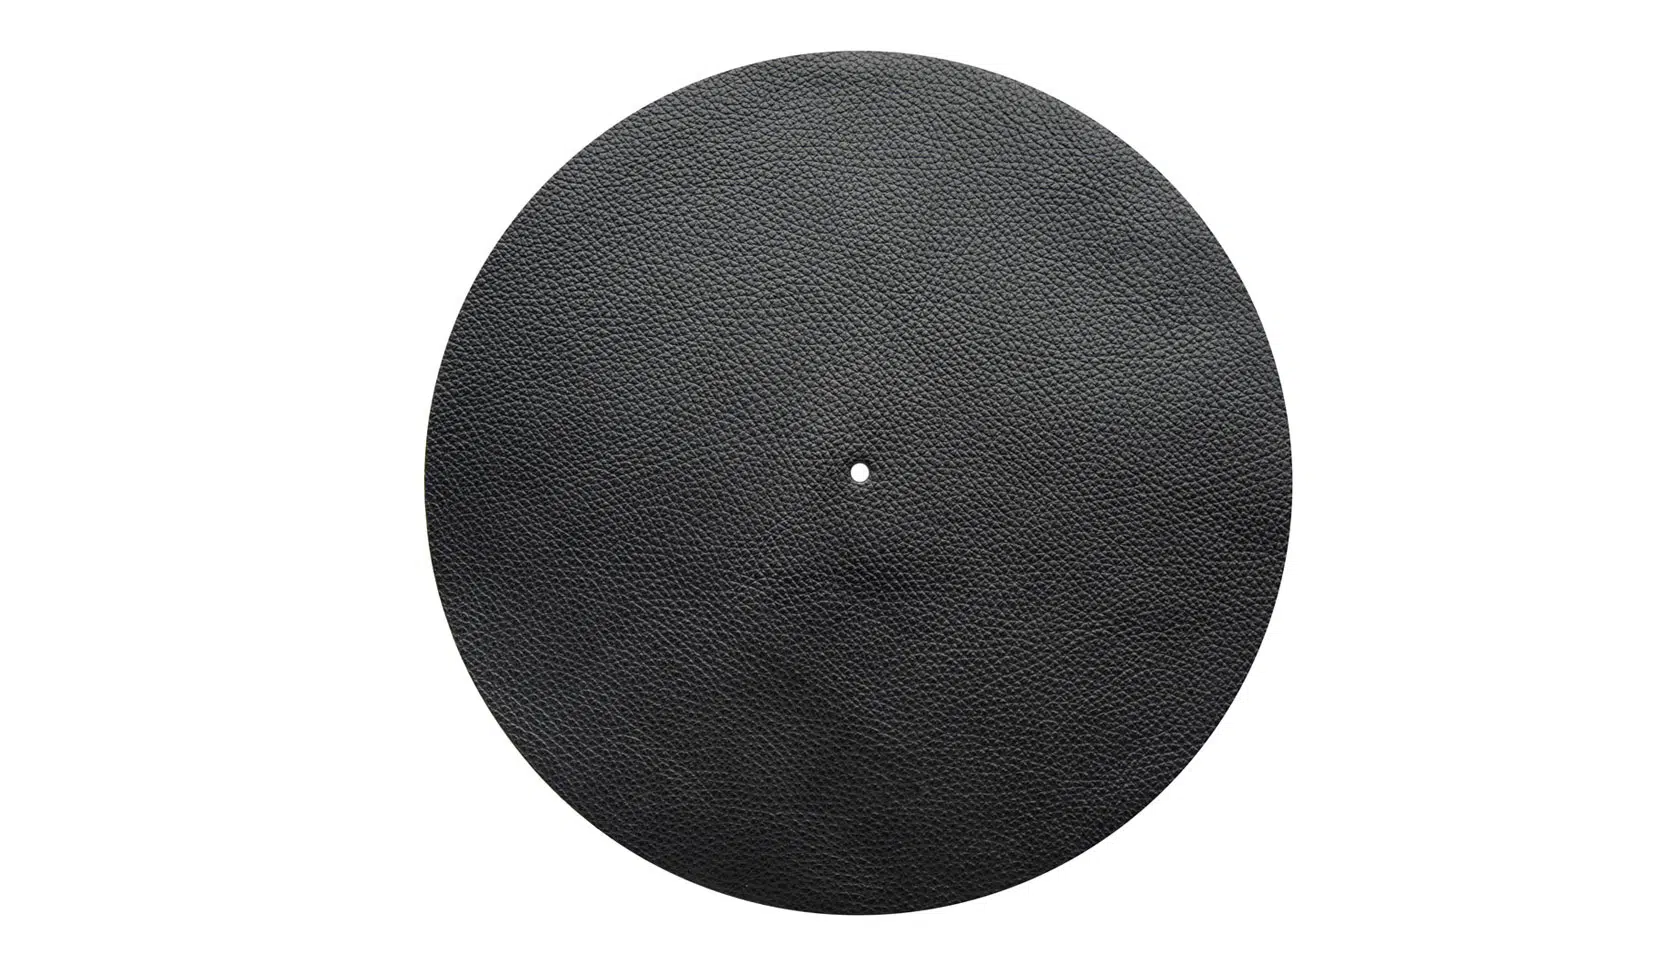 Top 5 Turntable Mat Materials For Superior Vinyl Sound